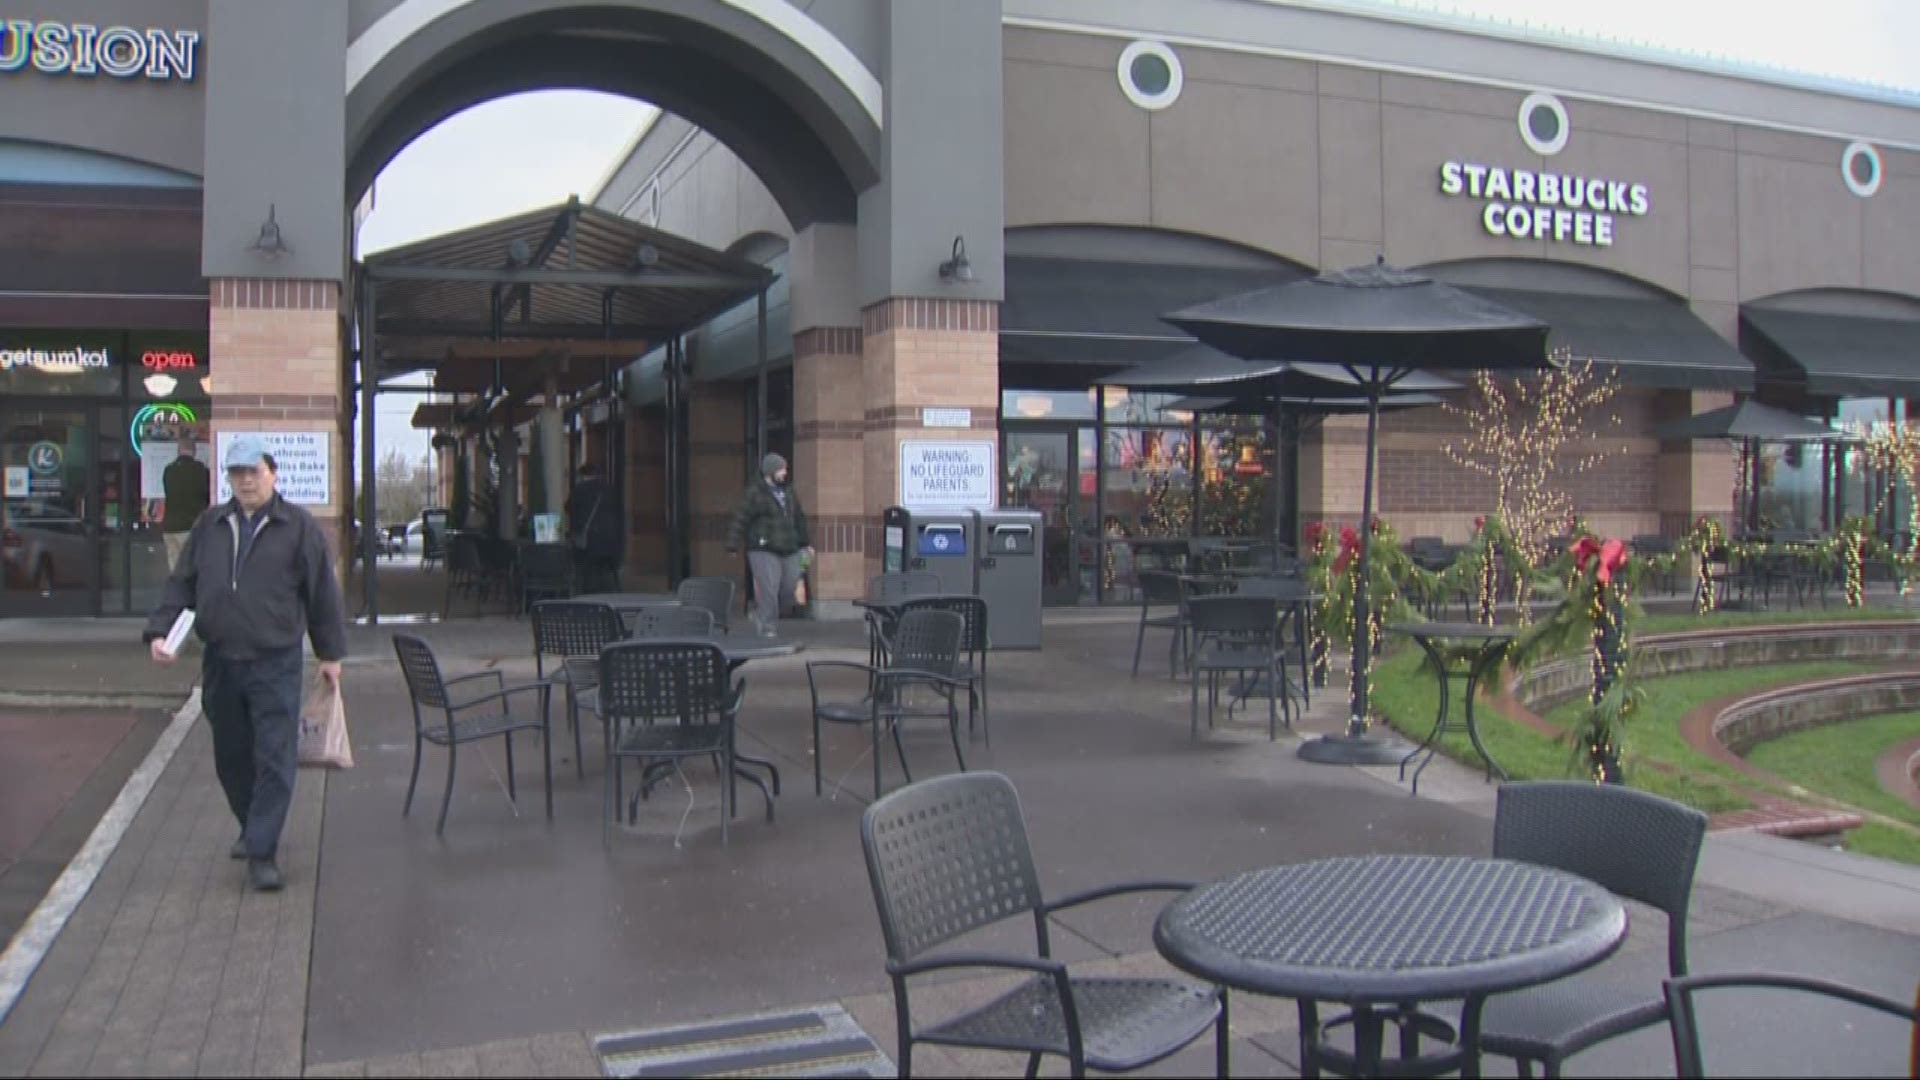 A 53-year-old man says he's lucky he wasn't seriously hurt when a stranger stabbed him in the back outside a Starbucks in Bethany.